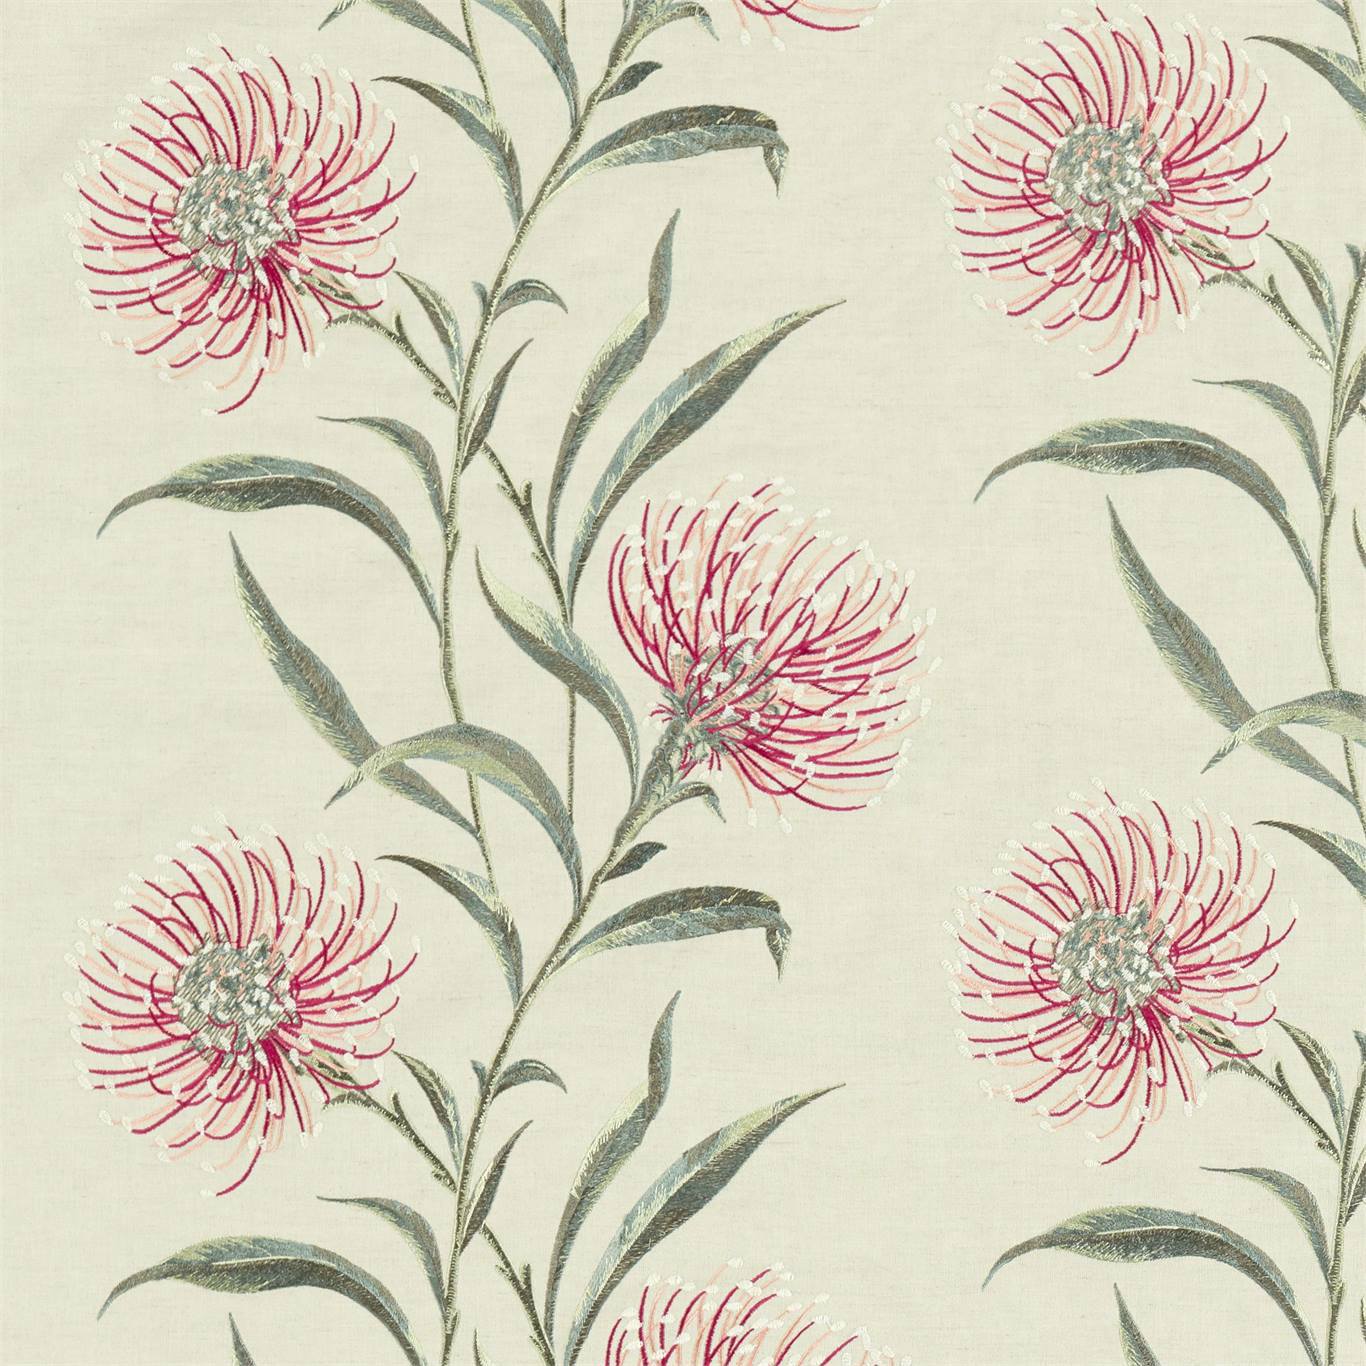 Catherinae Embroidery Fabric